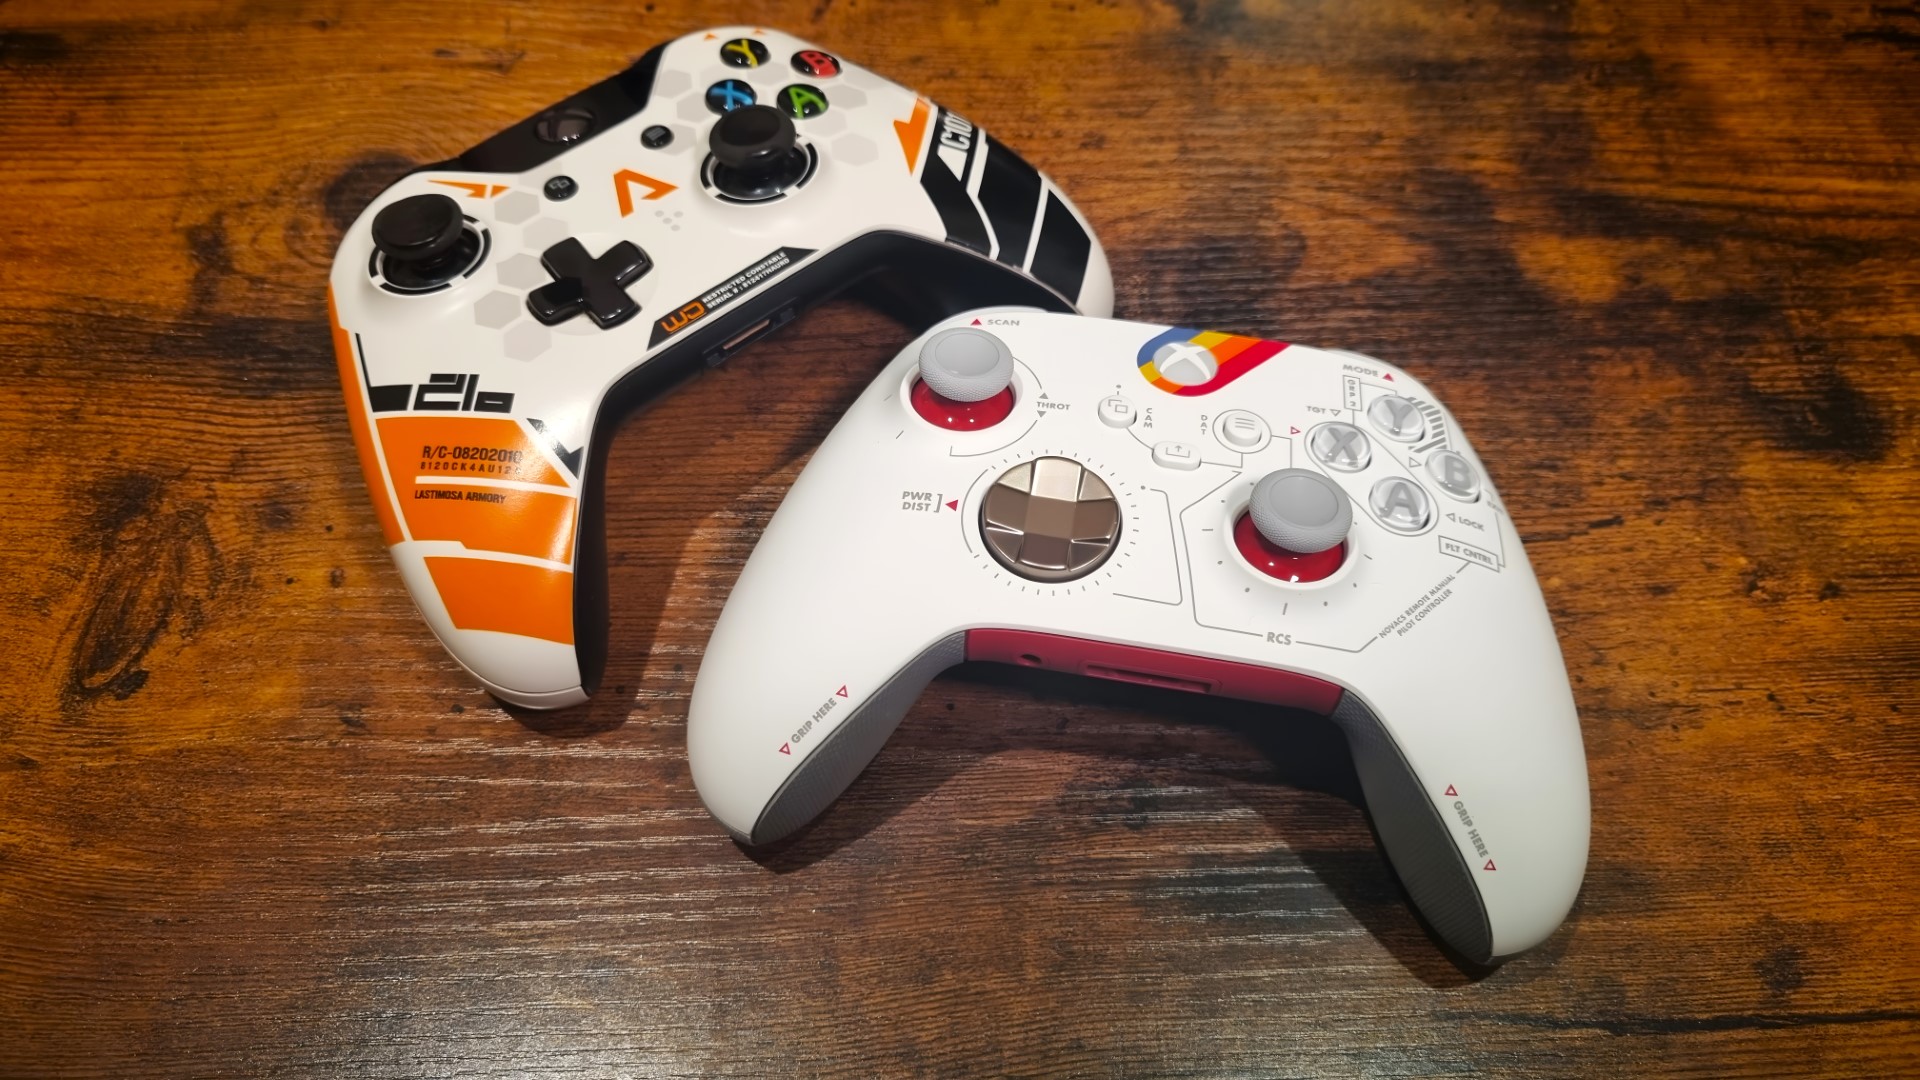 The Starfield and Titanfall Special Edition controllers